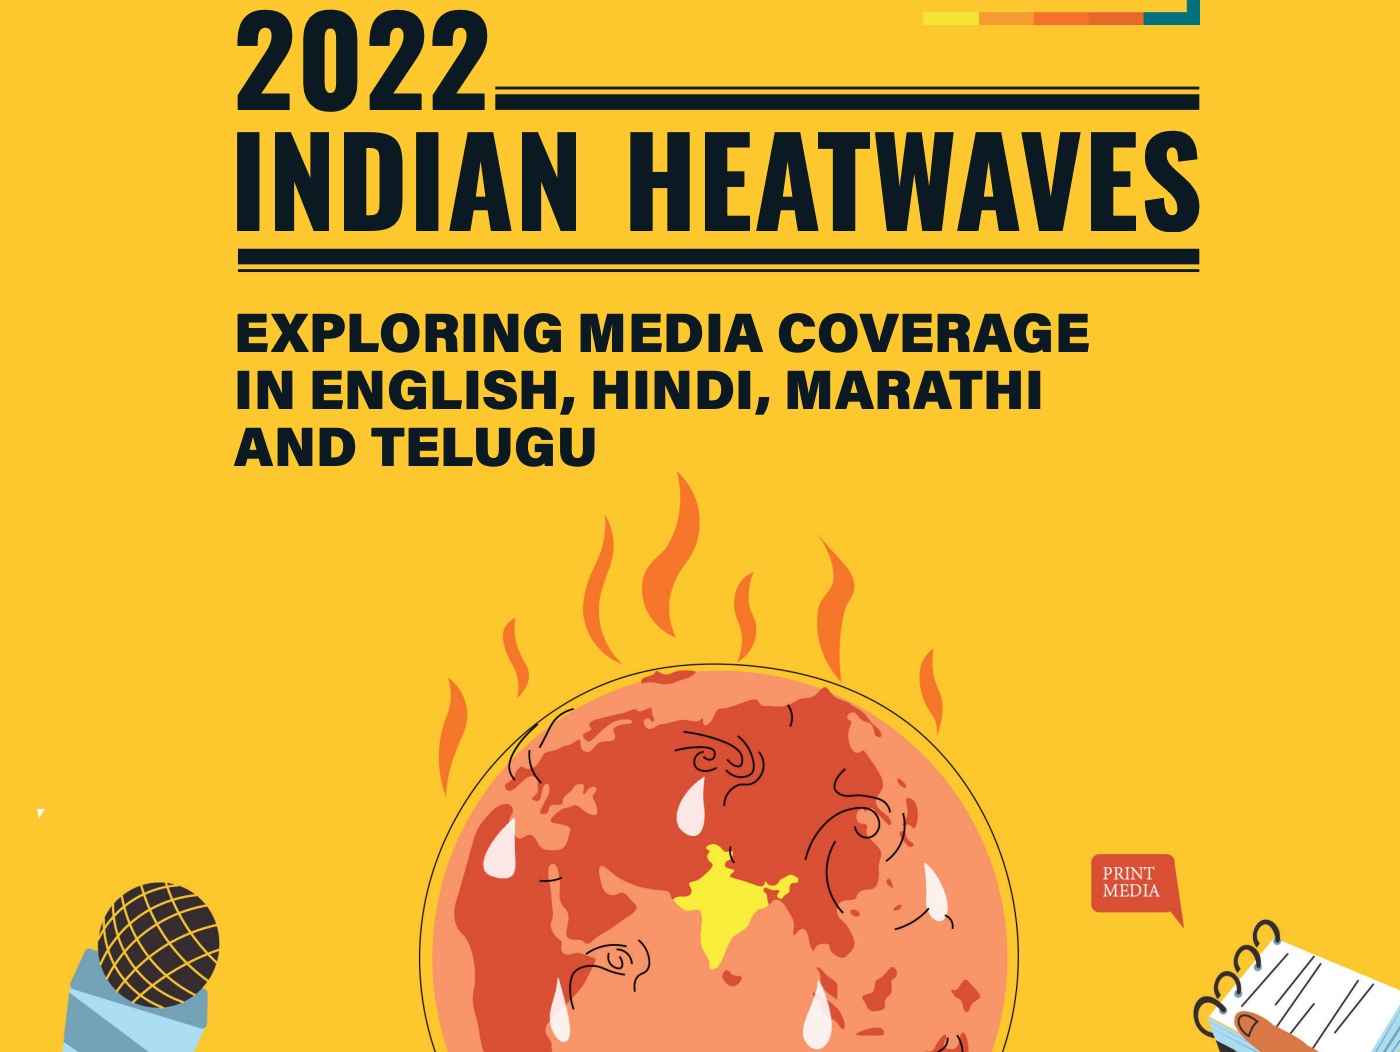 Cover of the report on the media coverage of the Indian heatwaves. 